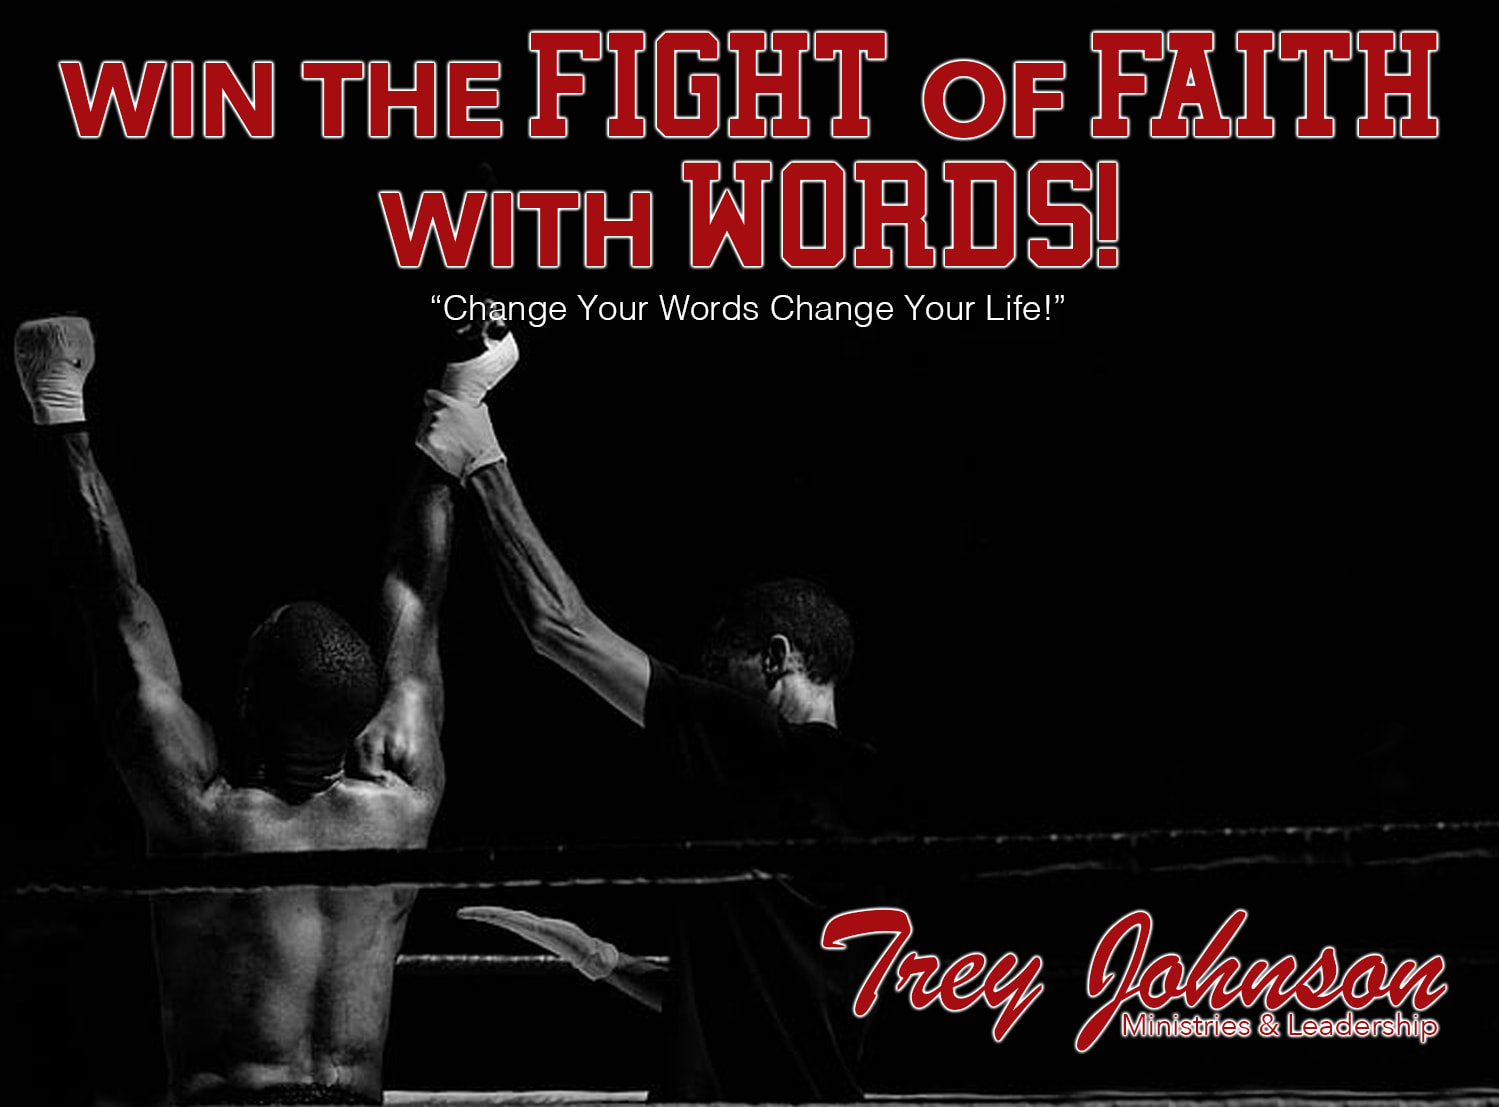 Win the Fight of Faith With Words